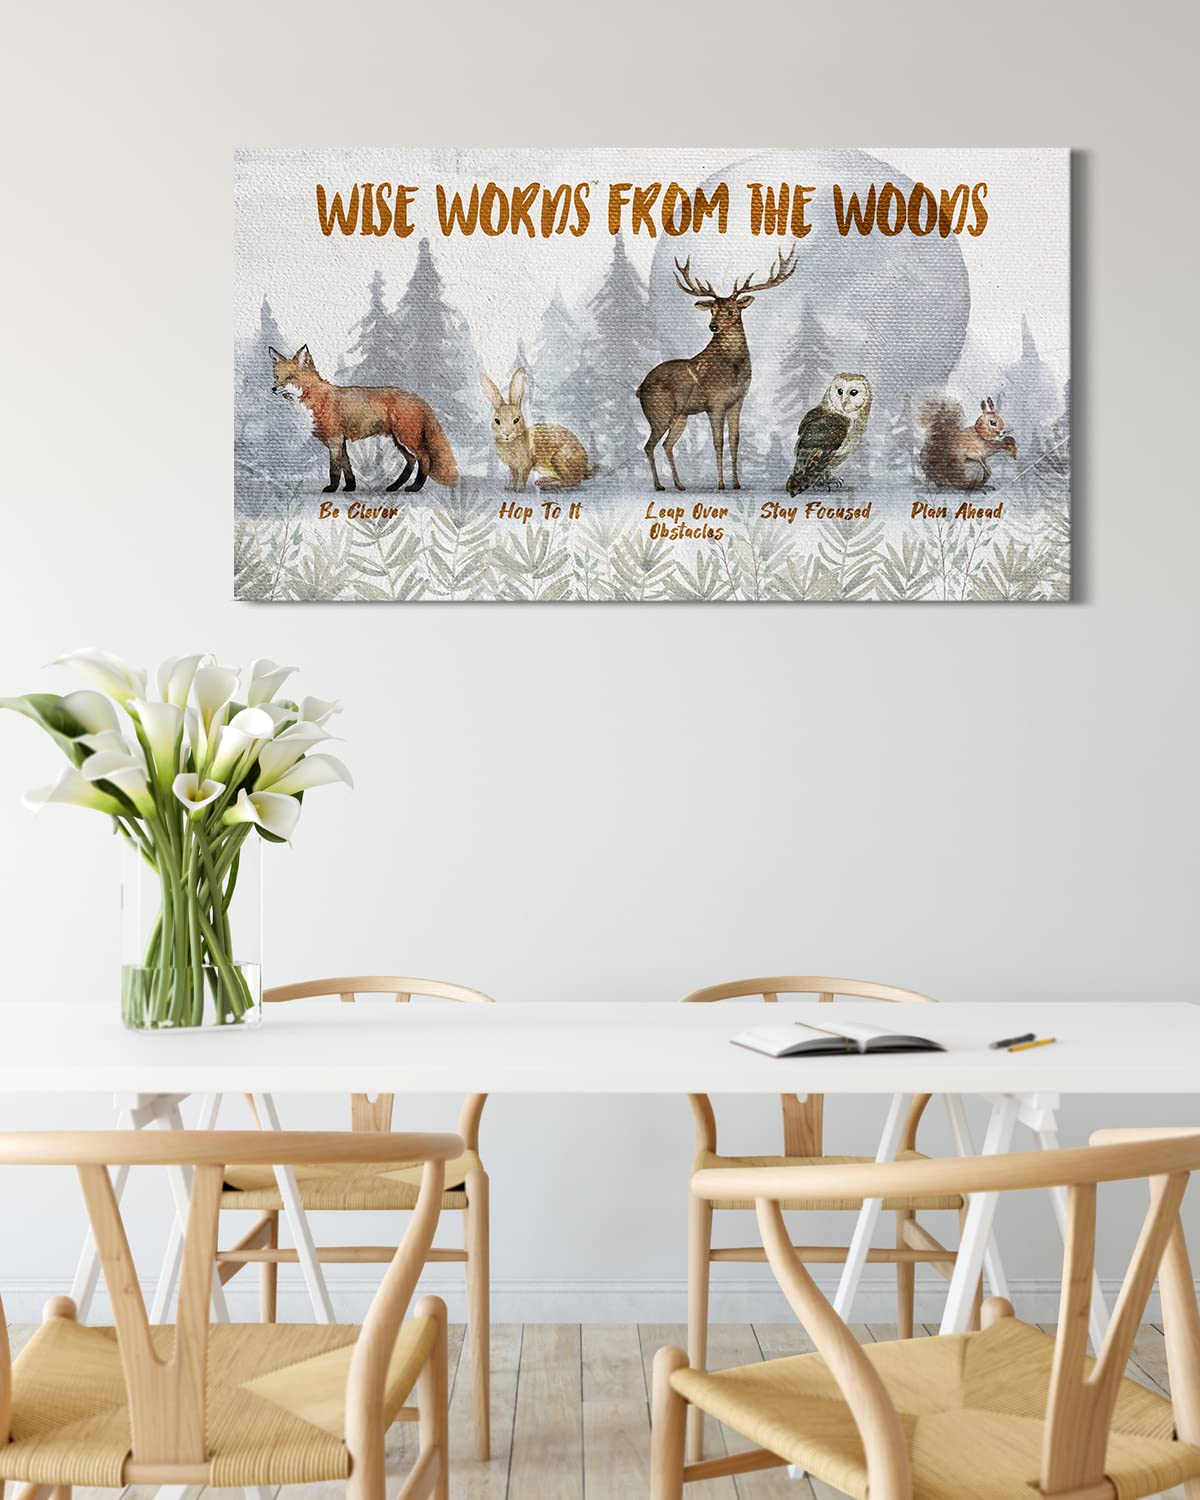 Wise words from woodland animals wall art - Wall canvas rustic decor - Features a Fox, Rabbit, Squirrel and Owl - Inspirational Wall Art - Great Gift for Nature Enthusiasts